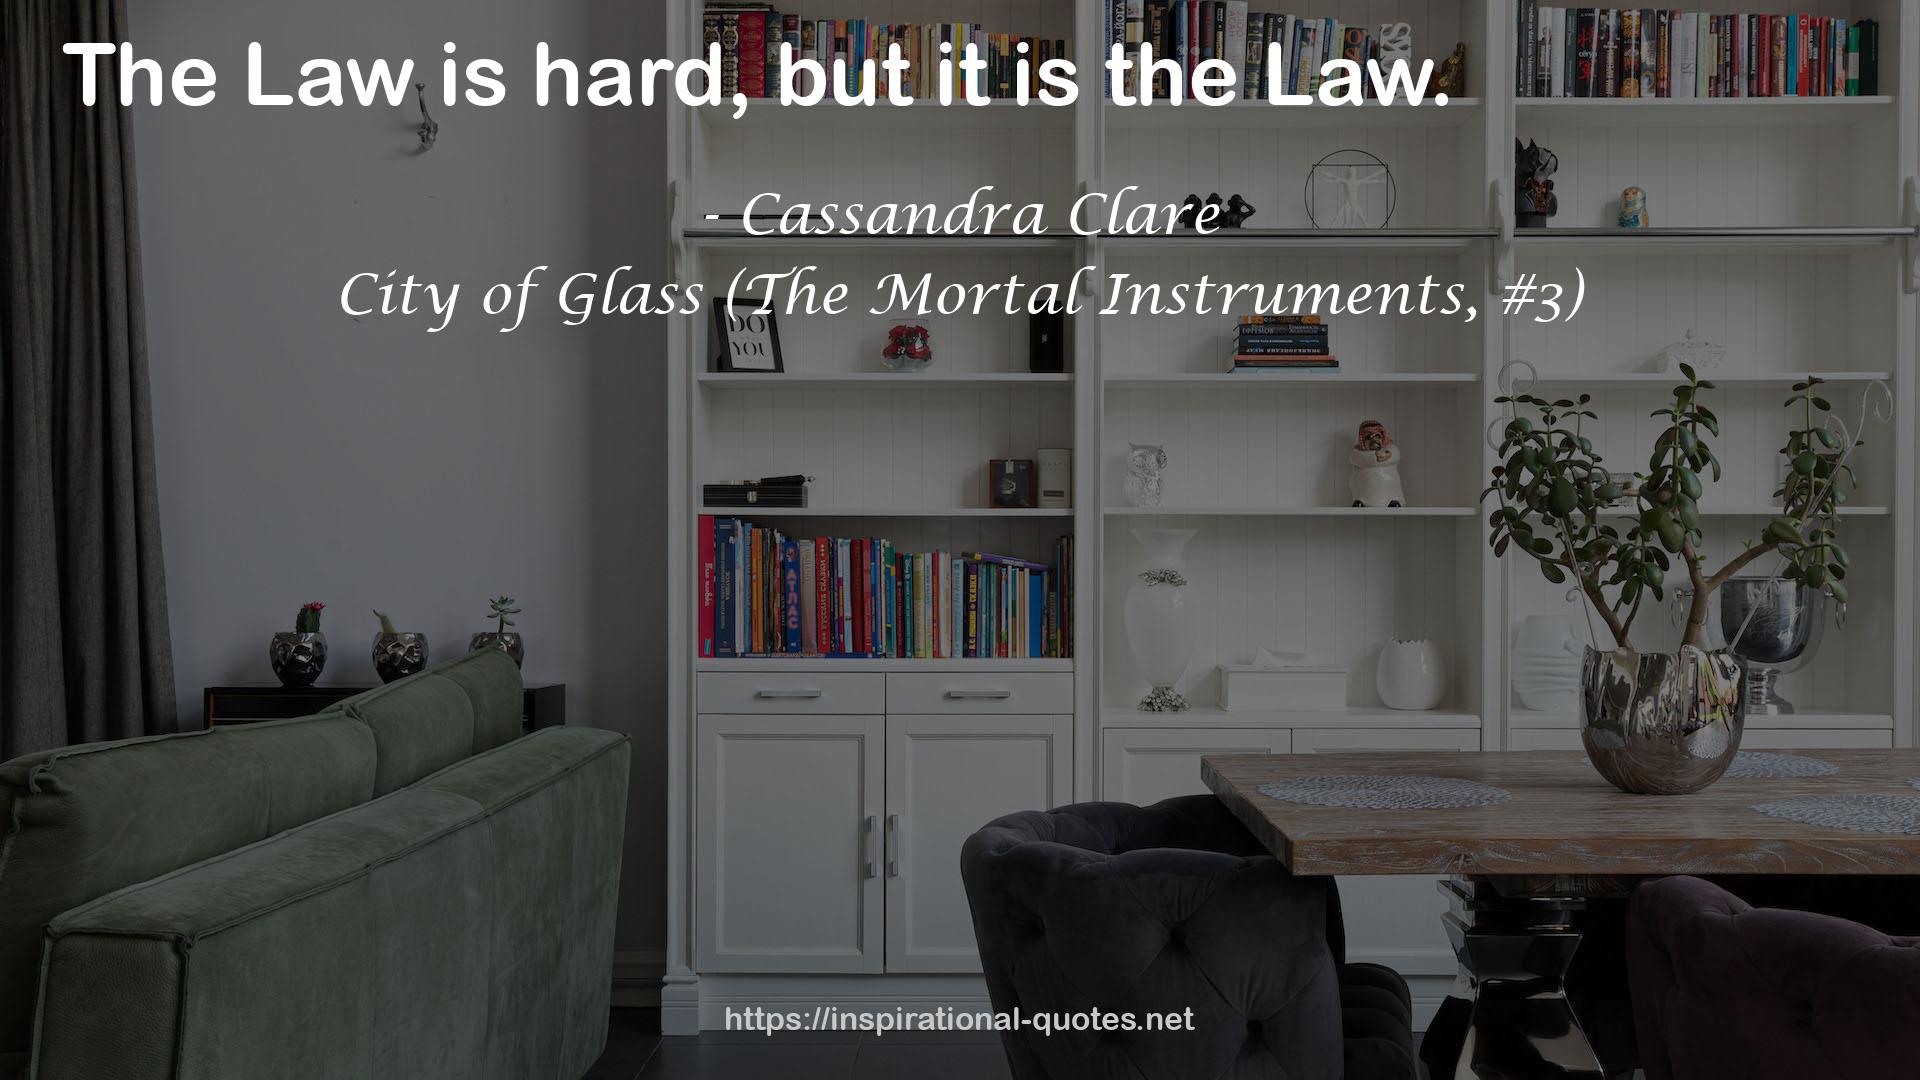 City of Glass (The Mortal Instruments, #3) QUOTES